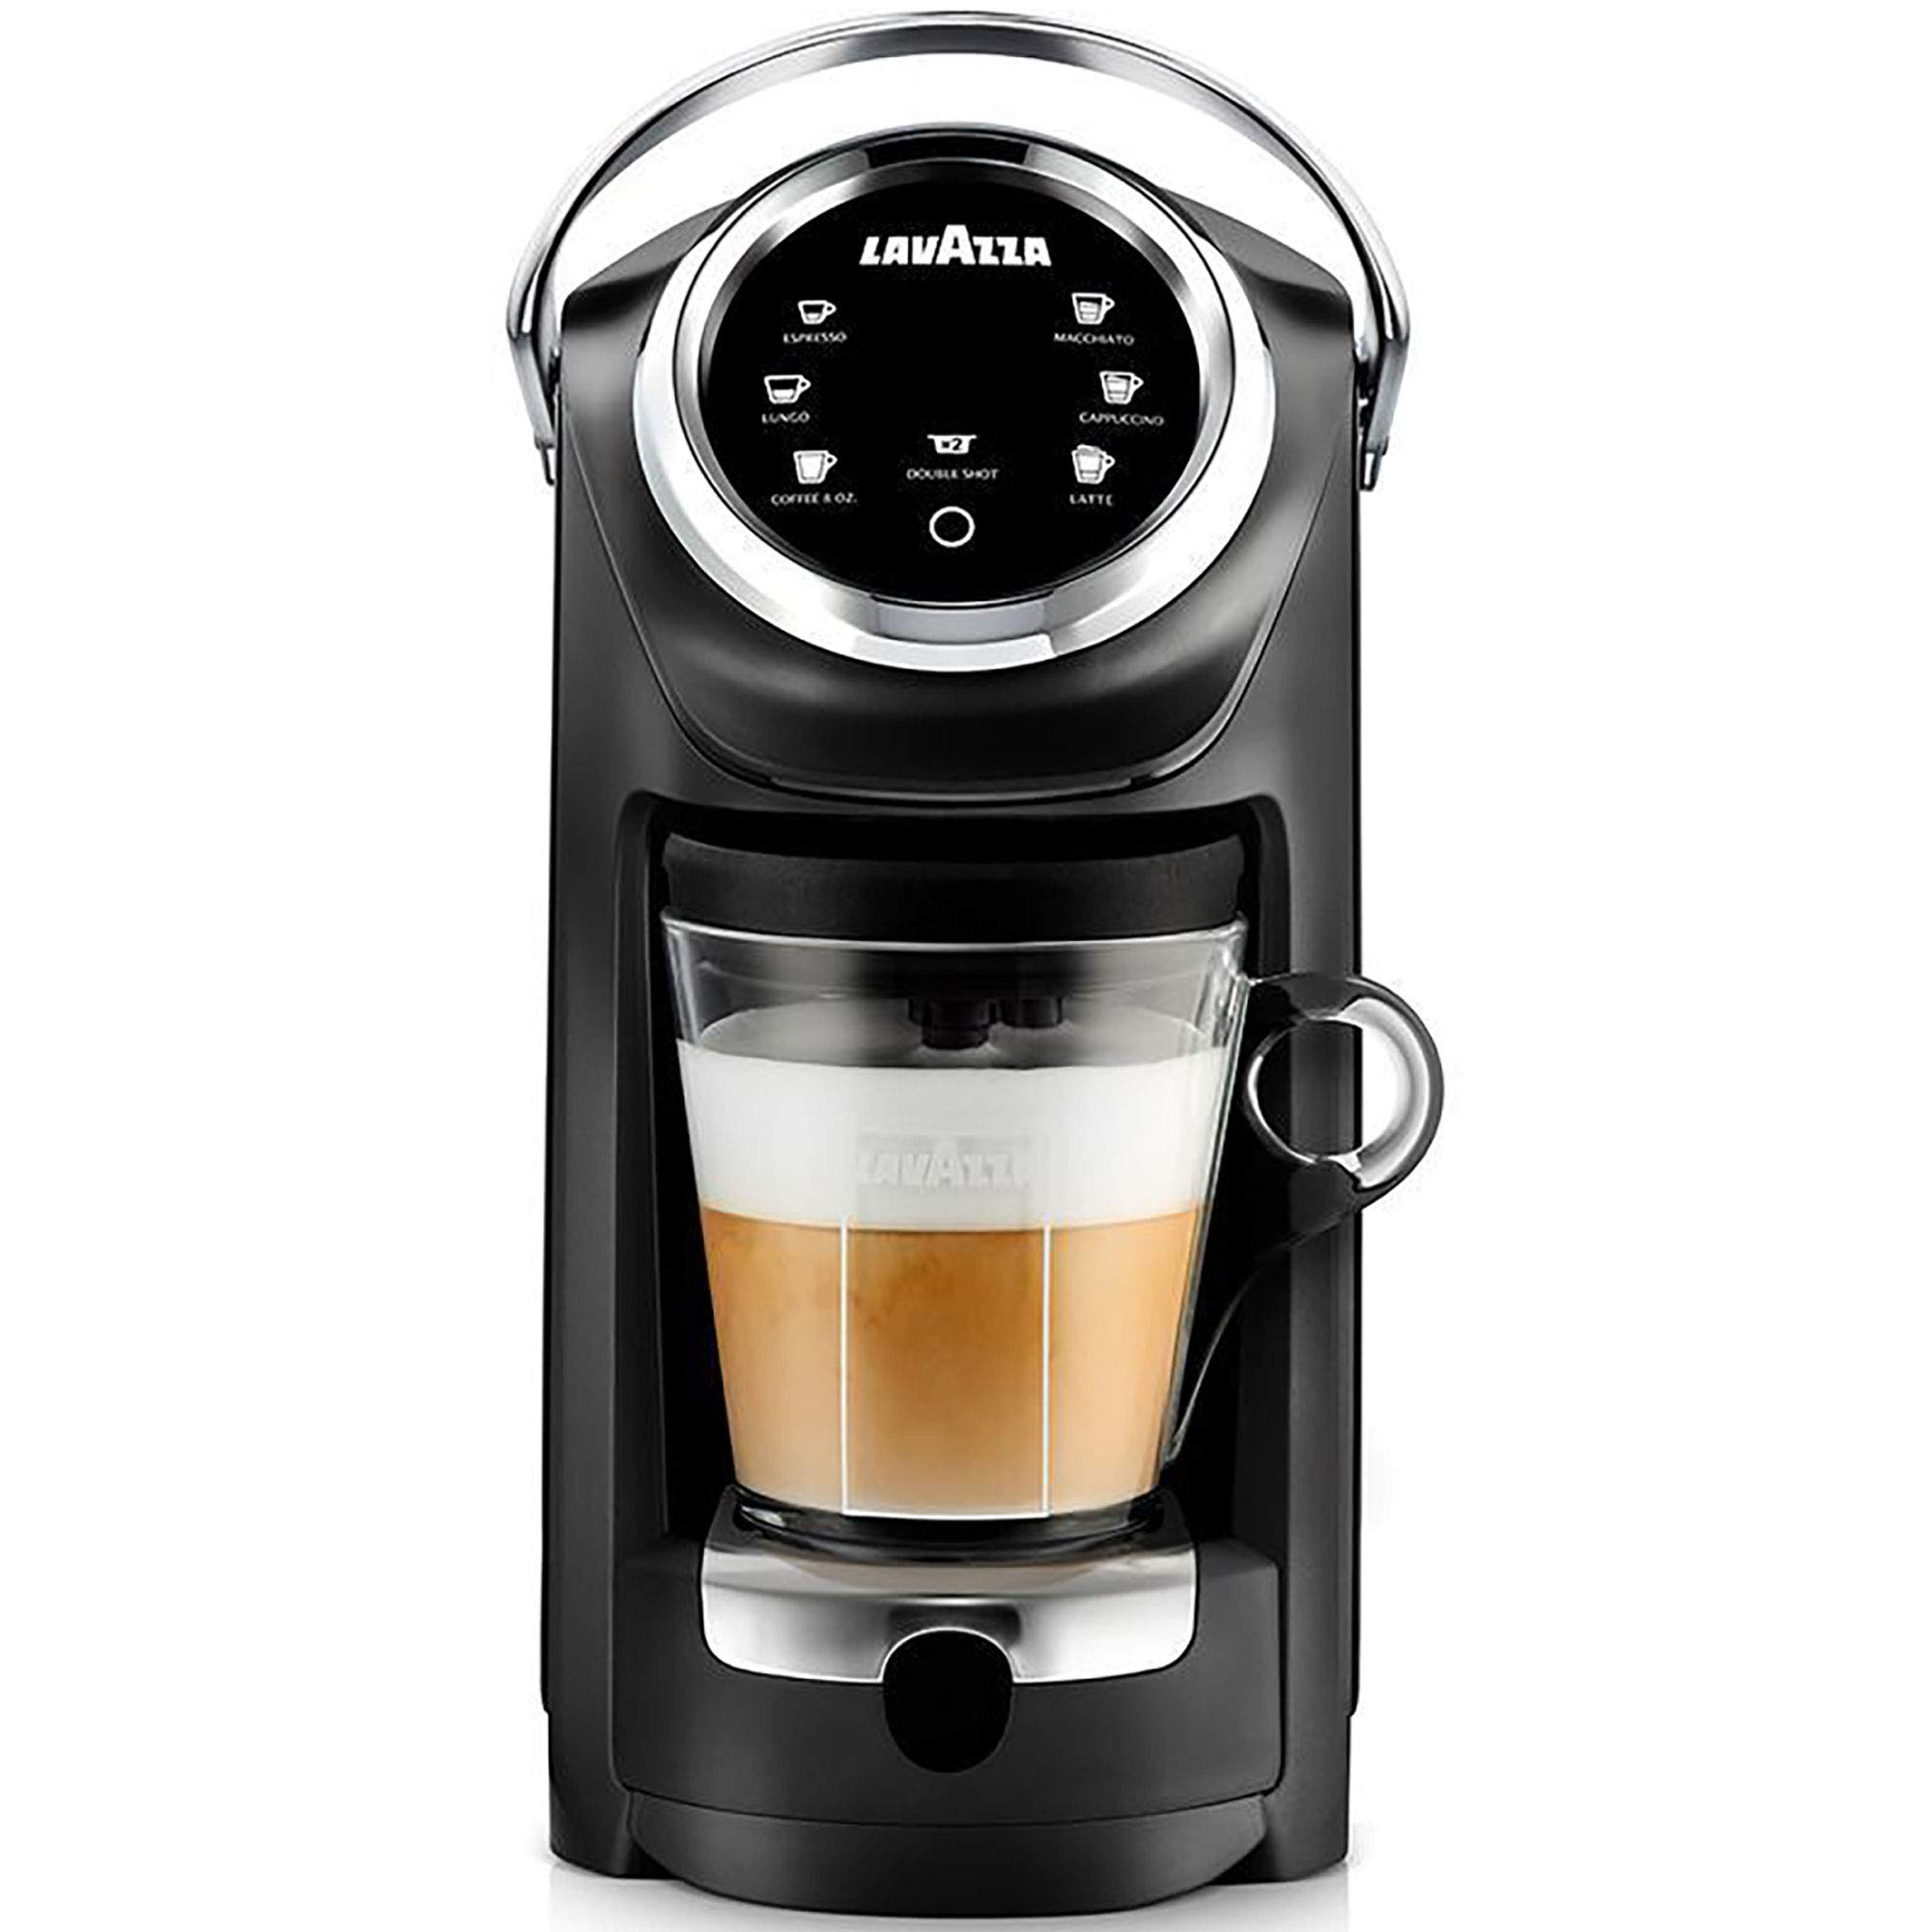 Lavazza Expert Coffee Bundle Classy Plus All-In-One Machine LB 400 + 1 Welcome Kit Pack of 36 Mixed Capsules + 1 Extra Vessel